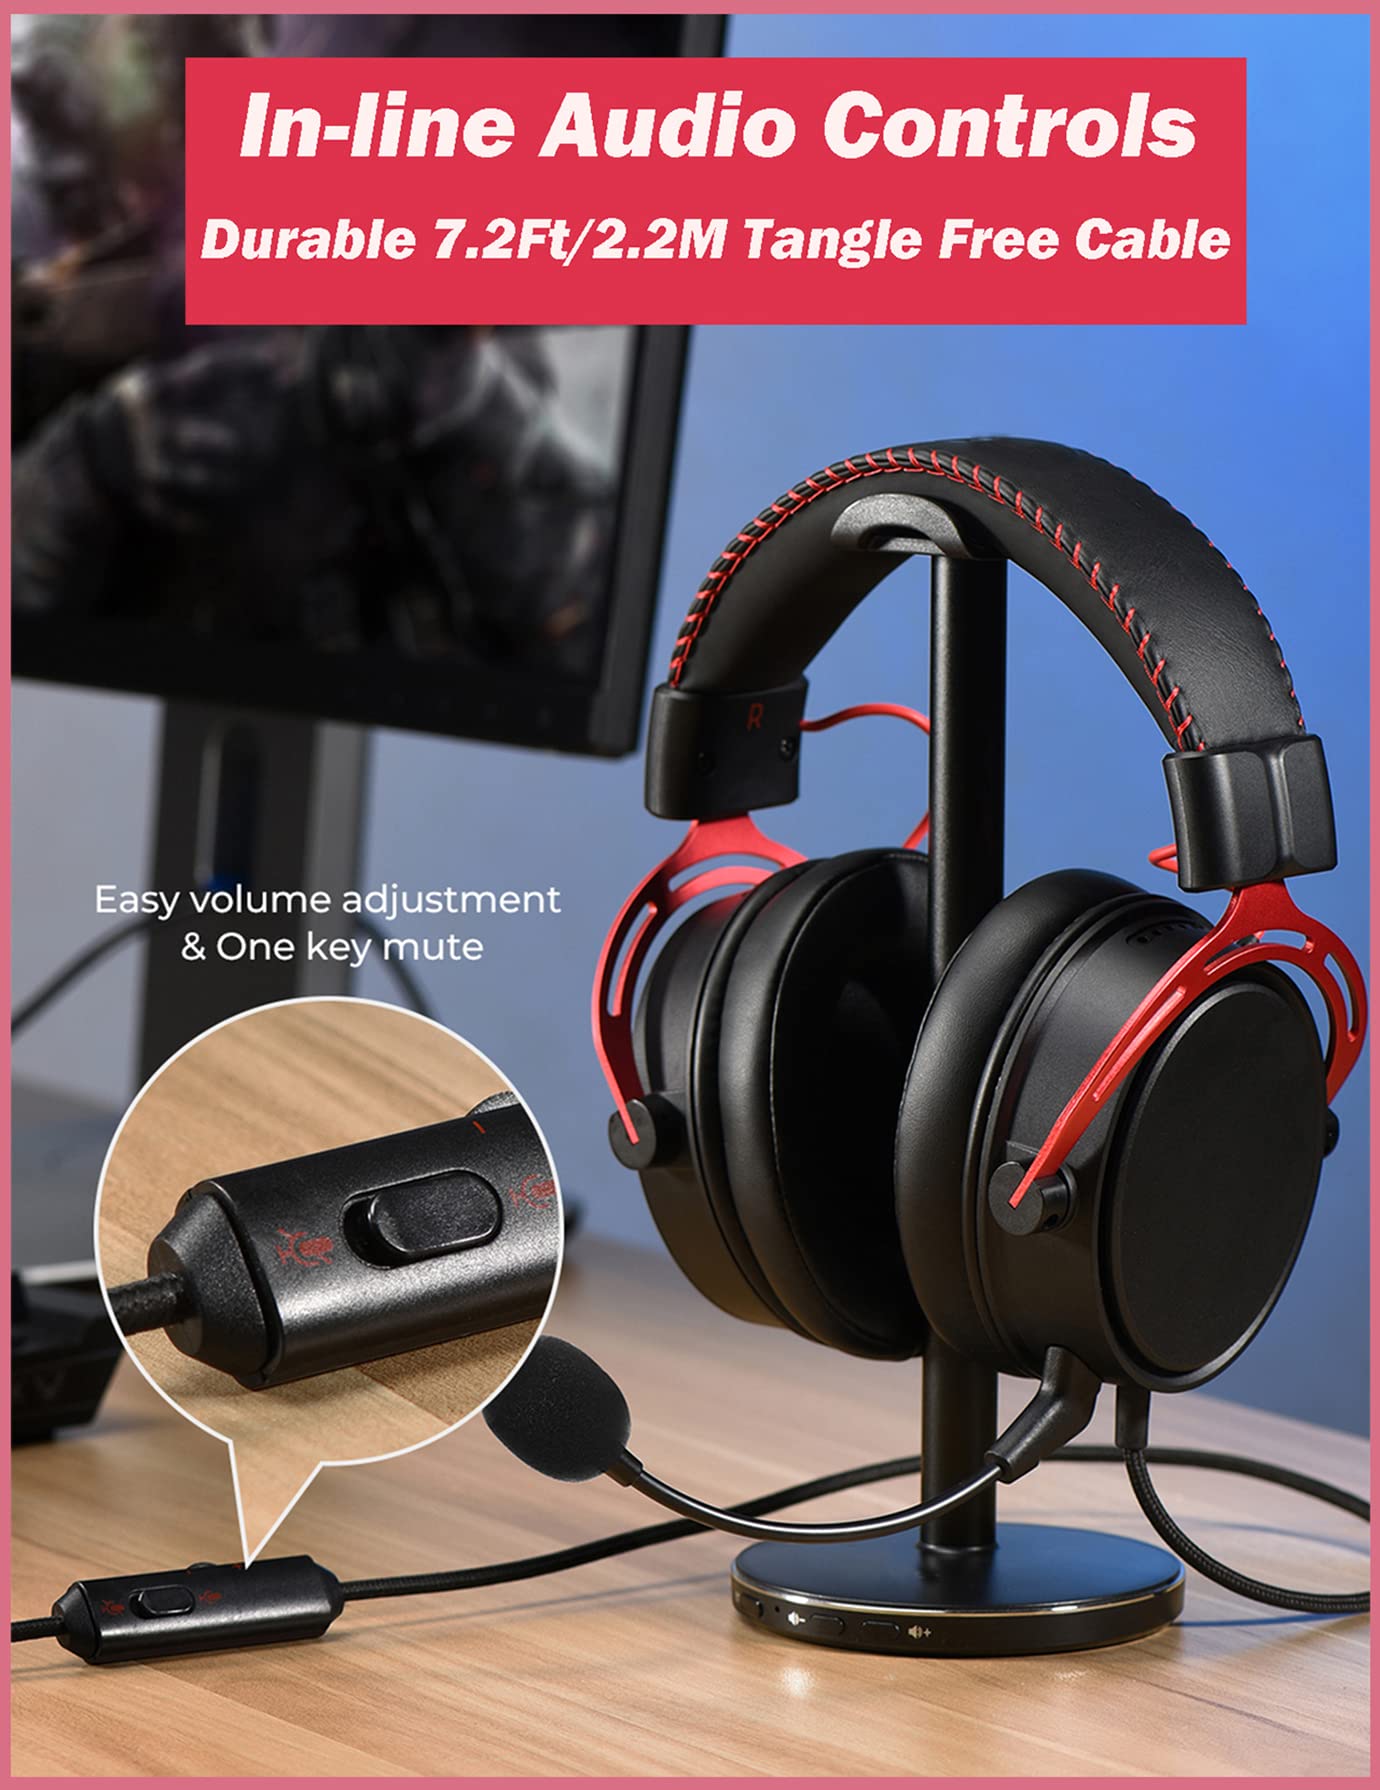 Gaming Headset with Noise Cancelling Mic, 7.1 Surround Sound PC Headset, 50mm Drivers Wired Stereo Headphones, In-Line Control, Over Ear Soft Memory Earpads, PS4 PS5 Xbox One Switch Laptop PC (Red)